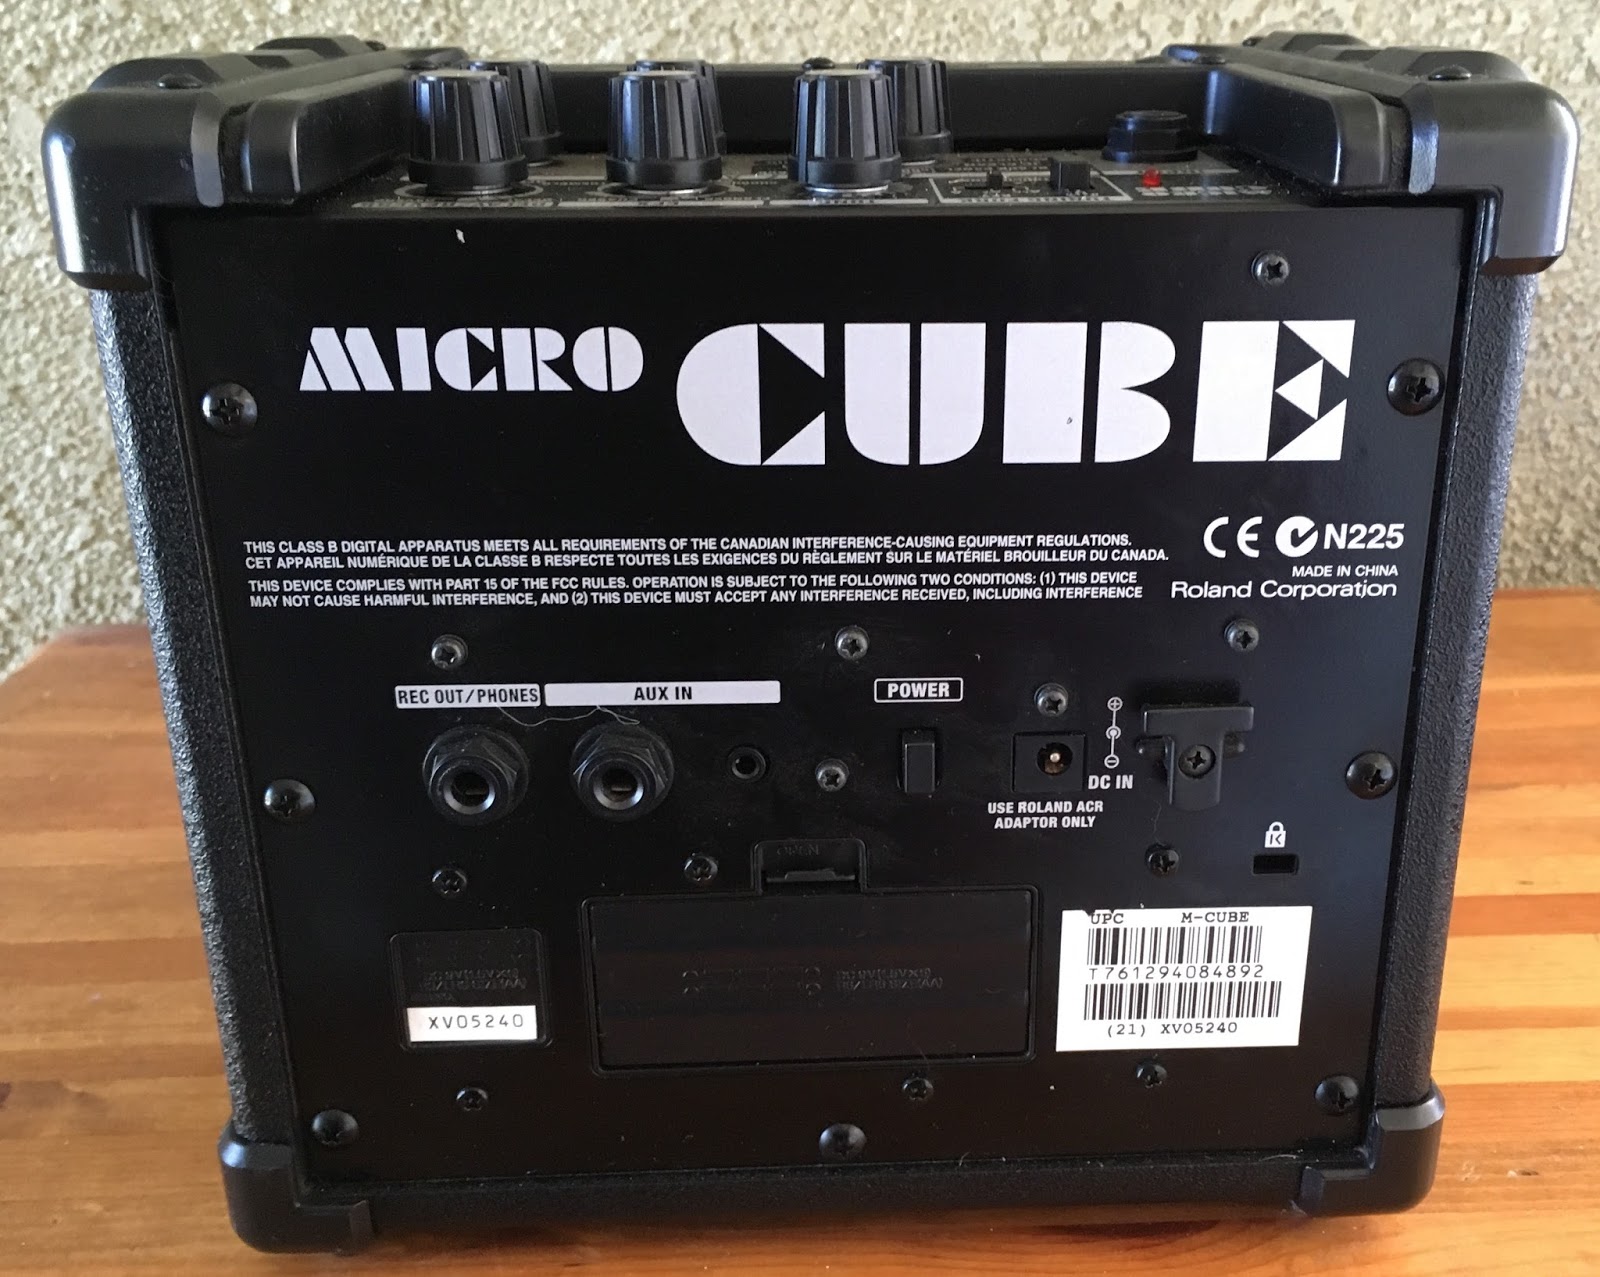 Rex and the Bass: Product Review: Roland Micro Cube N225 Guitar Amplifier